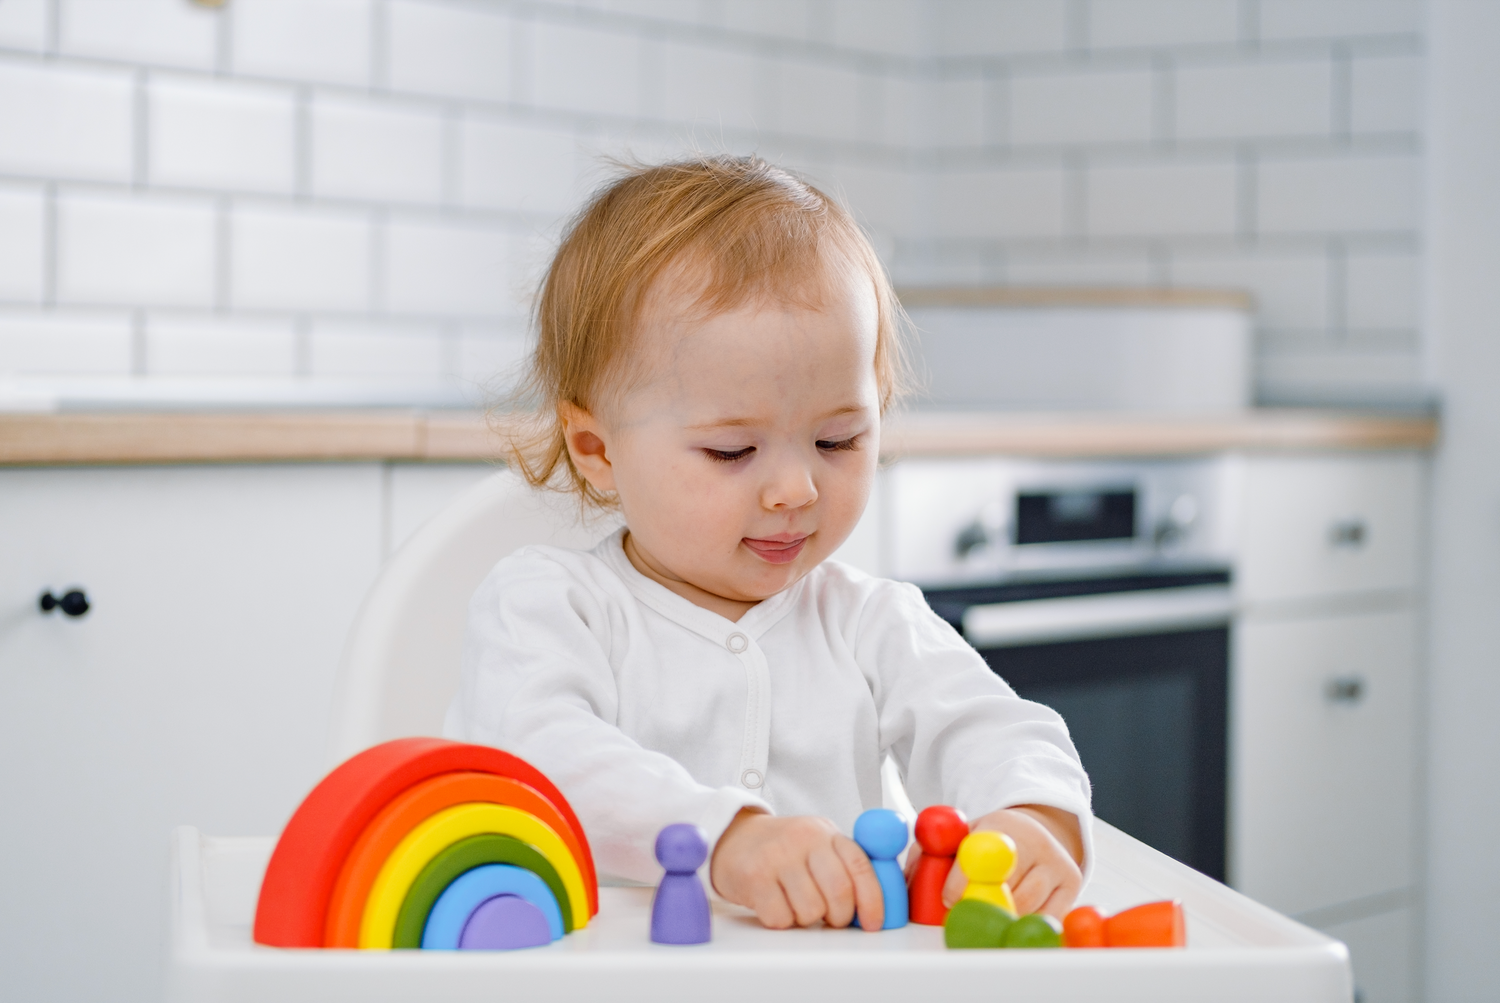 The Role of Play in Developing Fine Motor Skills